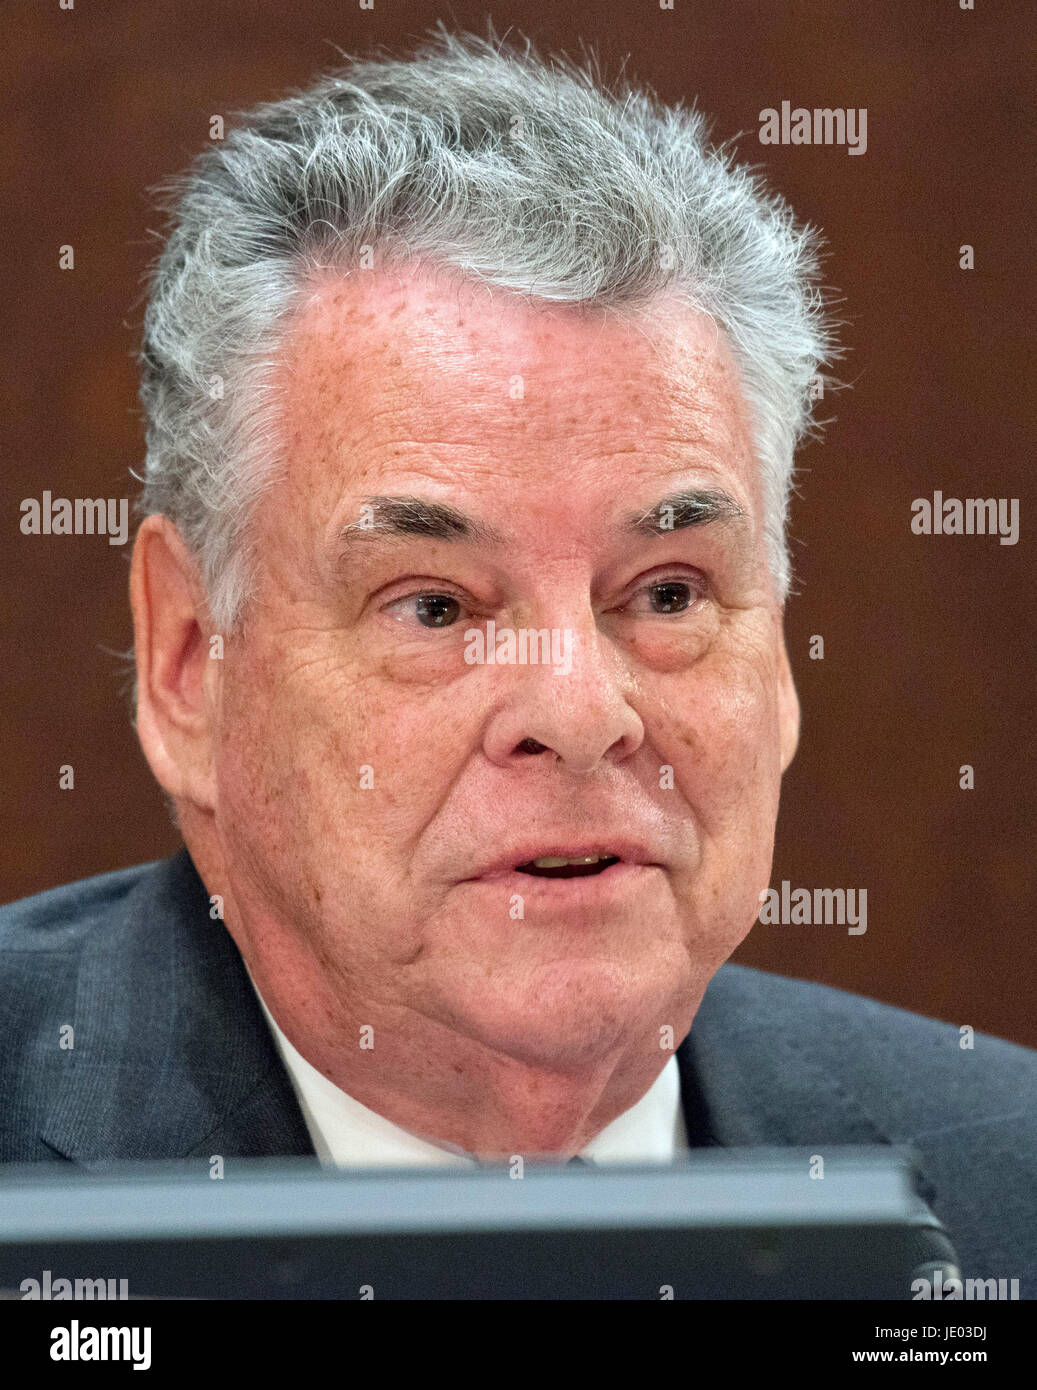 United States Representative Peter King (Republican of New York) listens as former US Secretary of Homeland Security Jeh Johnson testifies before the US House Permanent Select Committee on Intelligence Russia Investigative Task Force Hearing on Capitol Hill in Washington, DC on Wednesday, June 21, 2017. Photo Credit: Ron Sachs/CNP/AdMedia Stock Photo